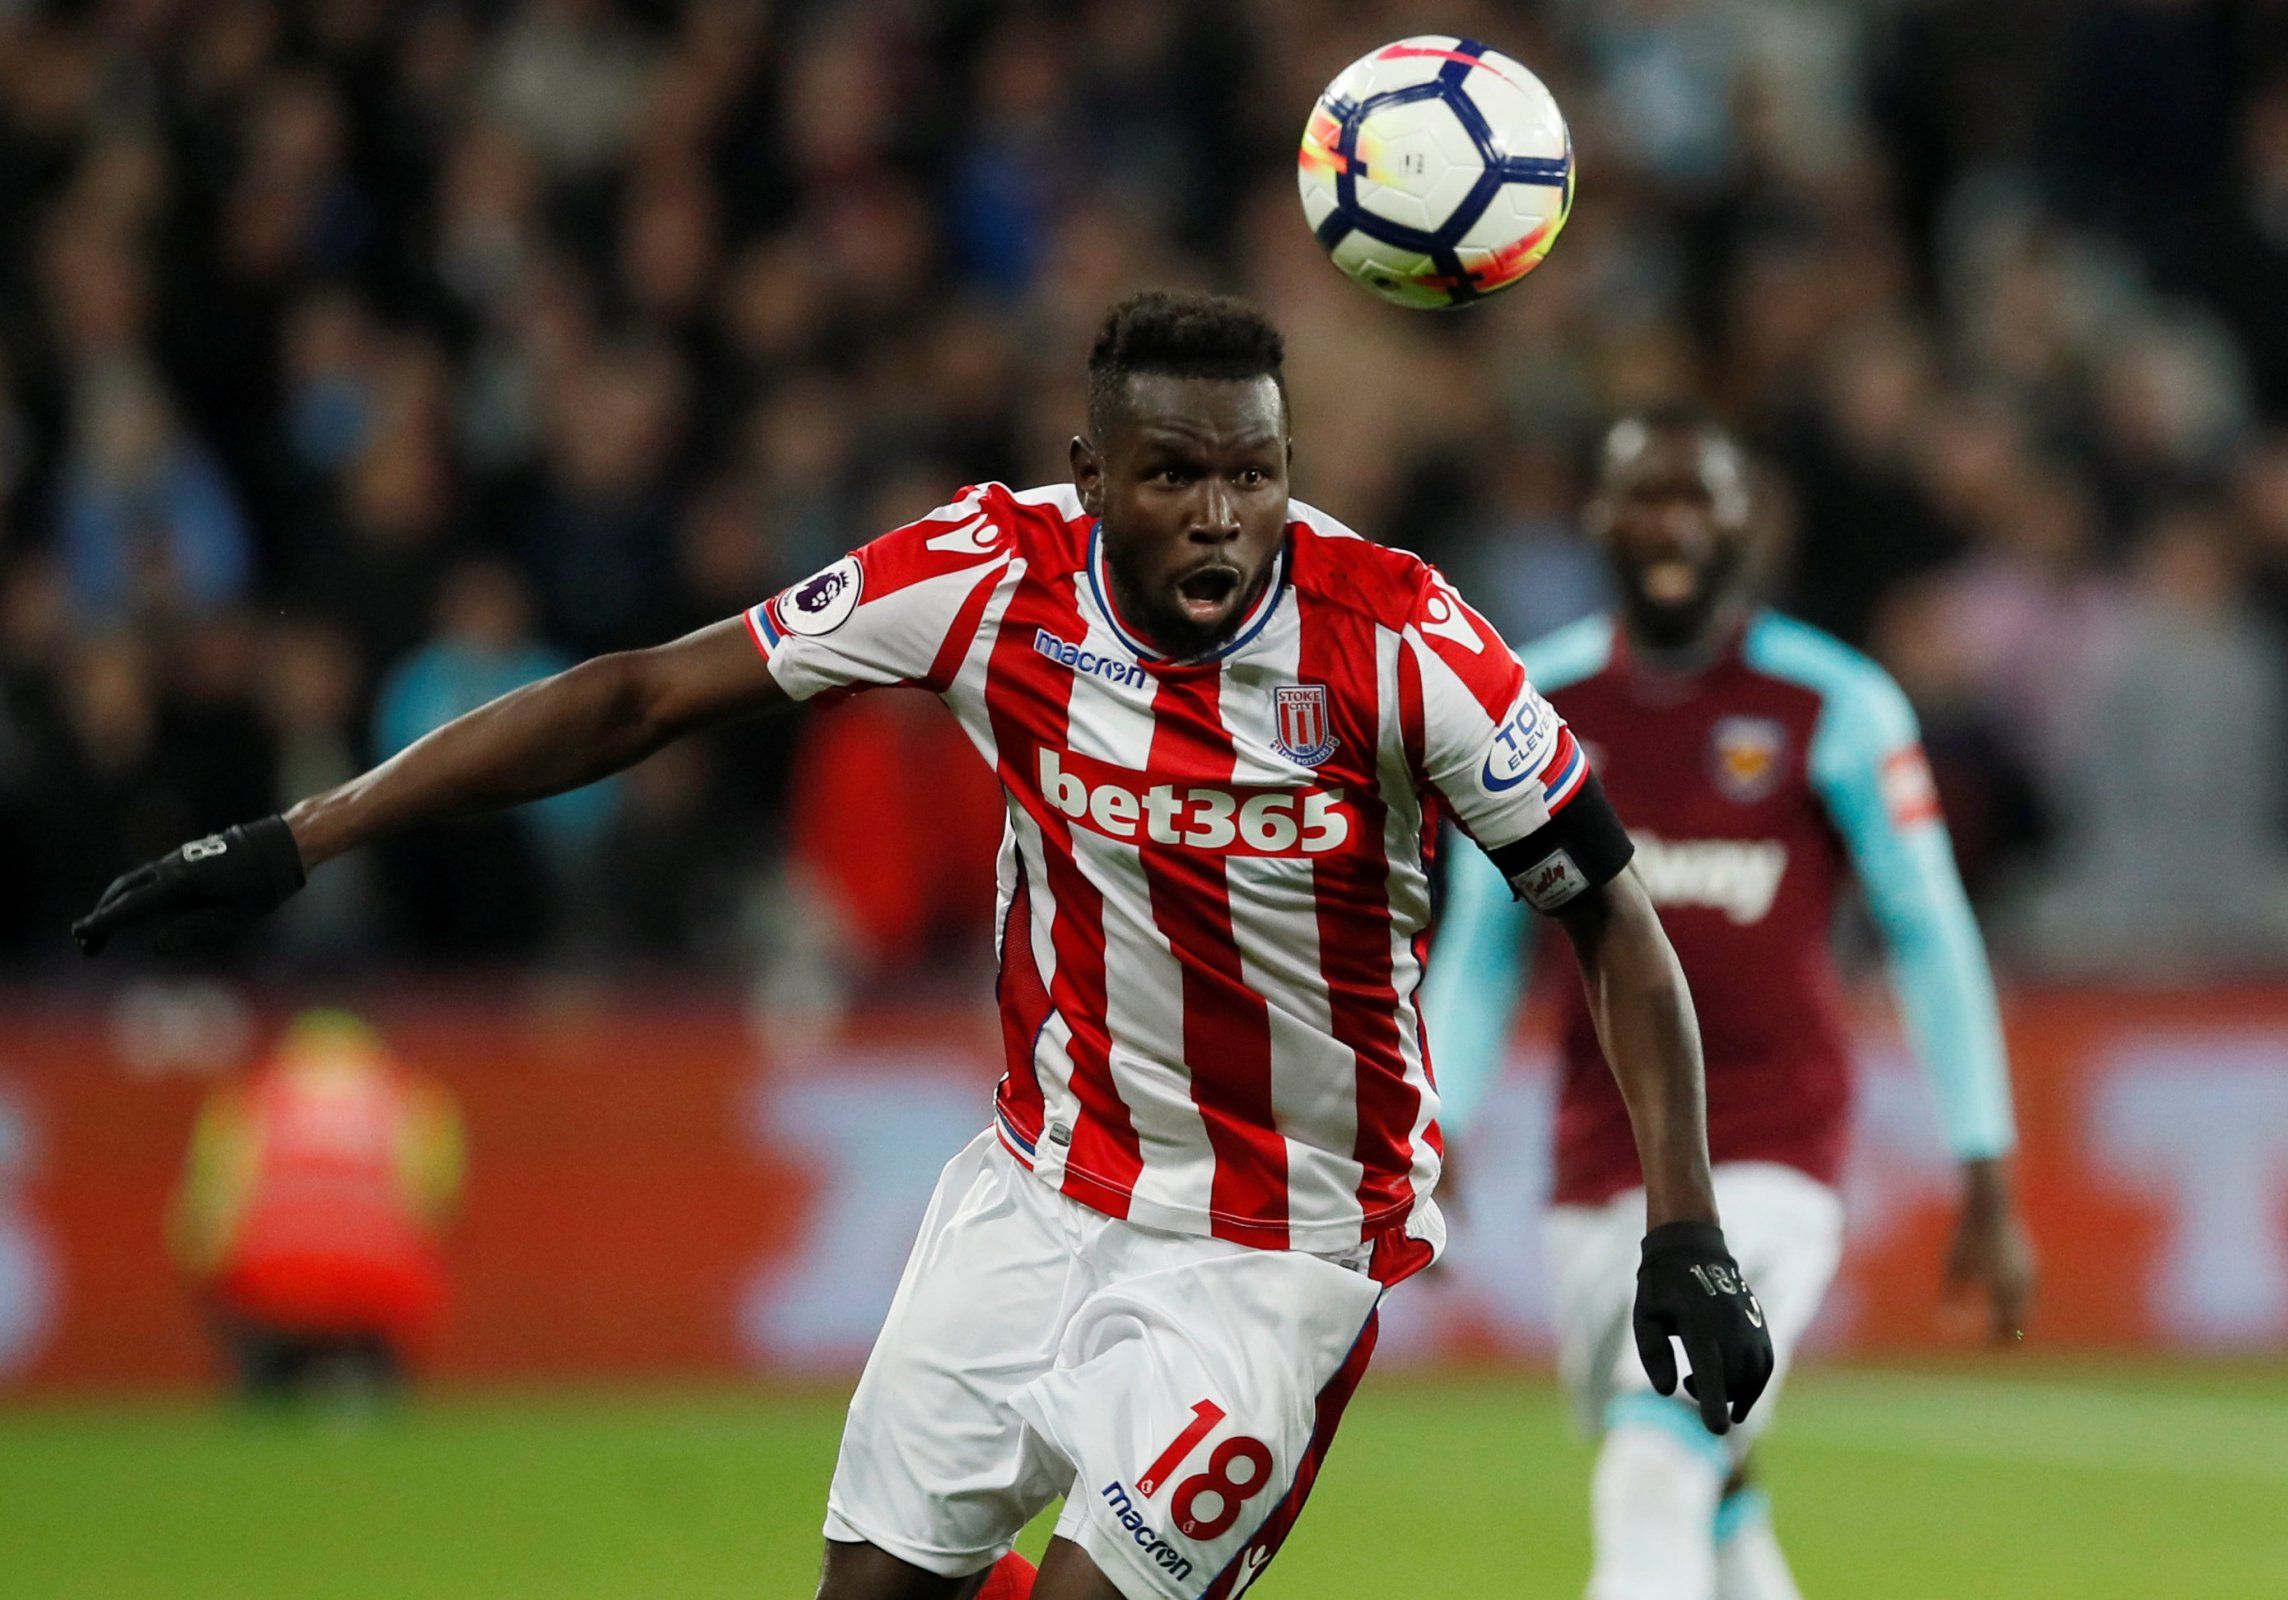 Mame Biram Diouf hunts down the ball against West Ham